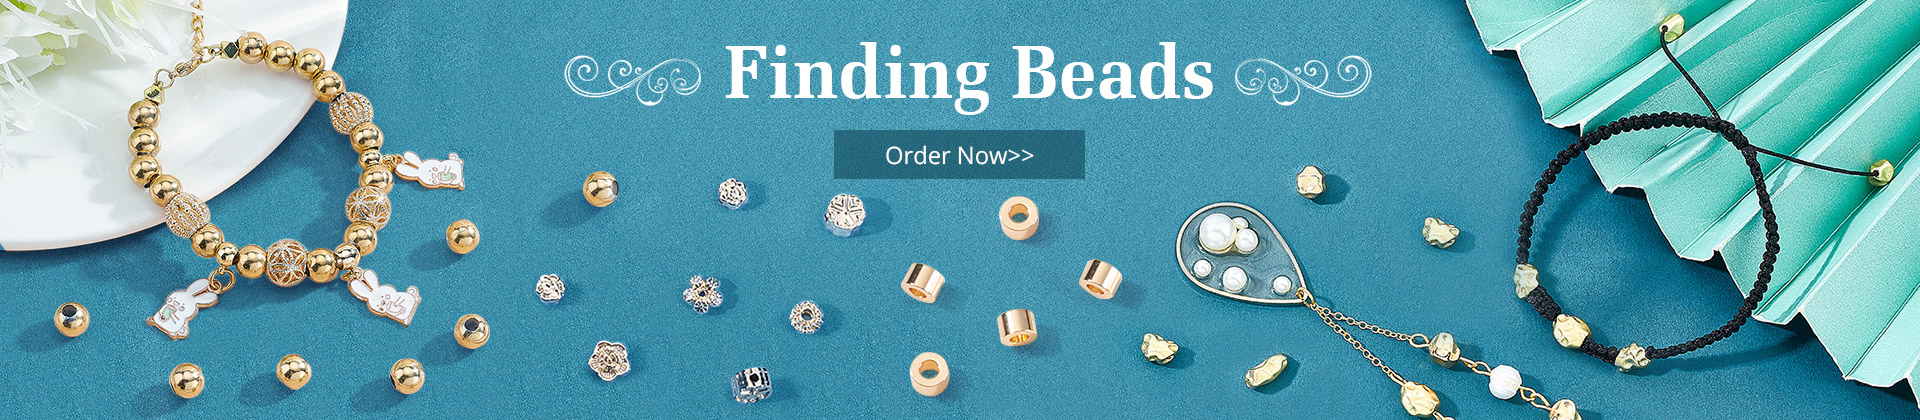 Finding Beads